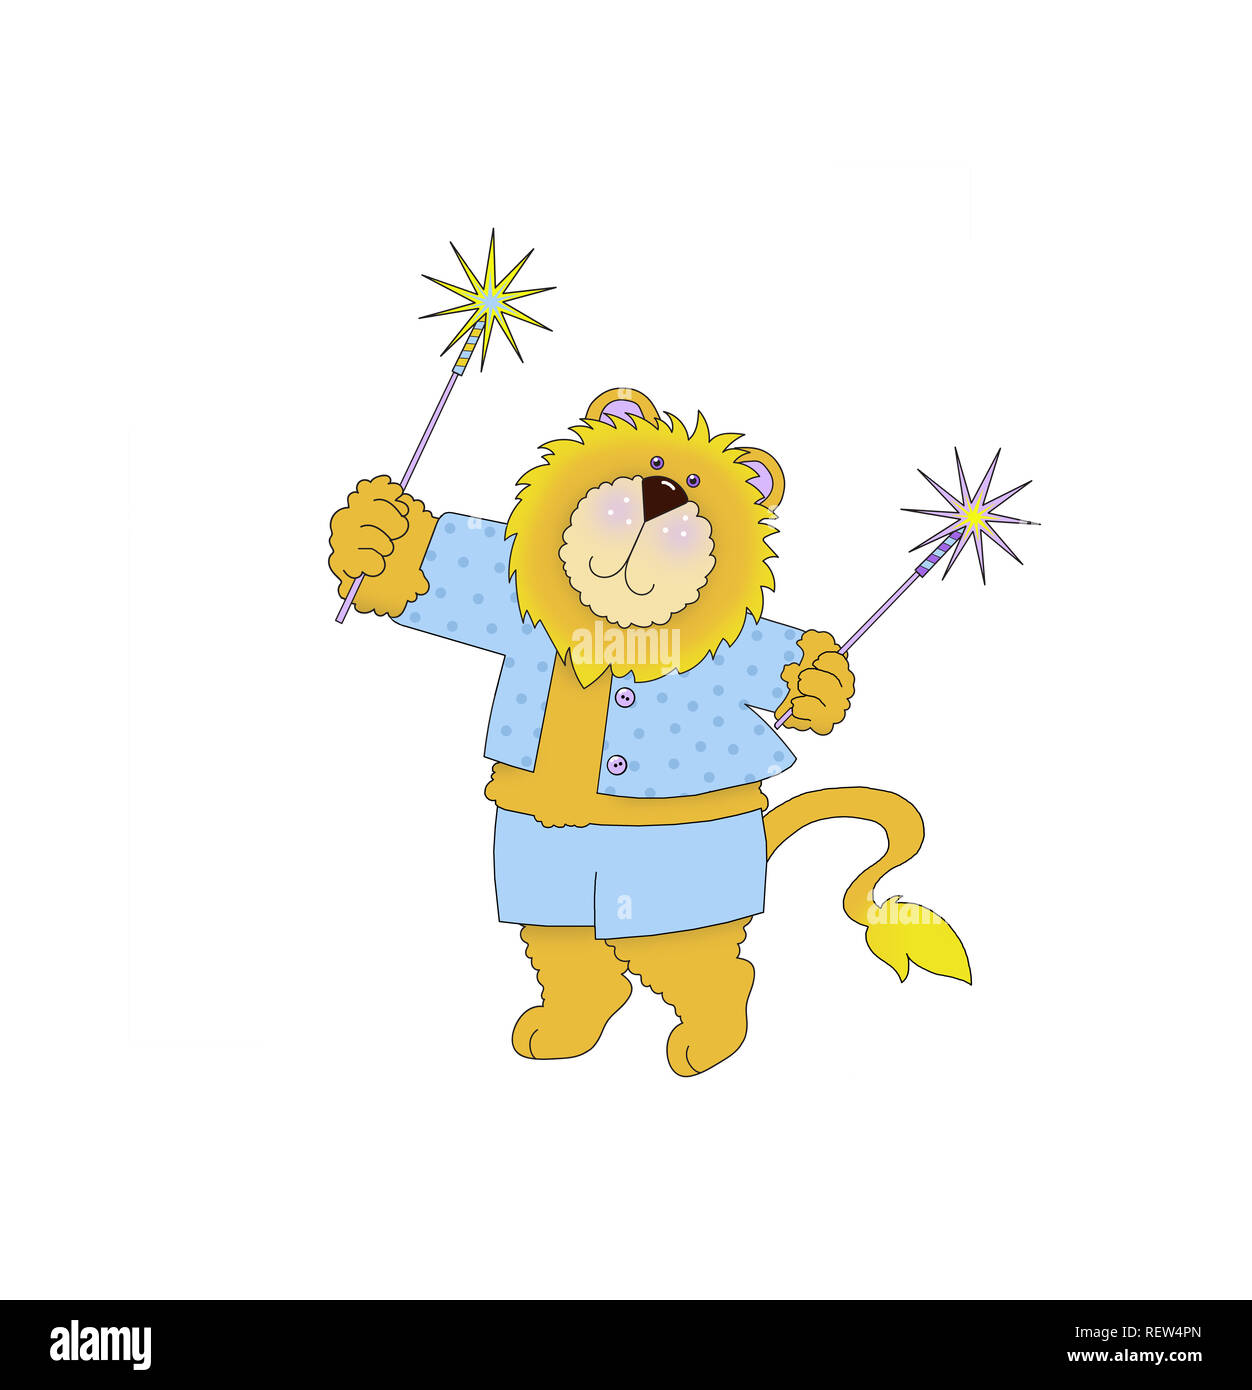 Illustration of a cute lion wearing blue clothing and waving a sparkler against a white background Stock Photo